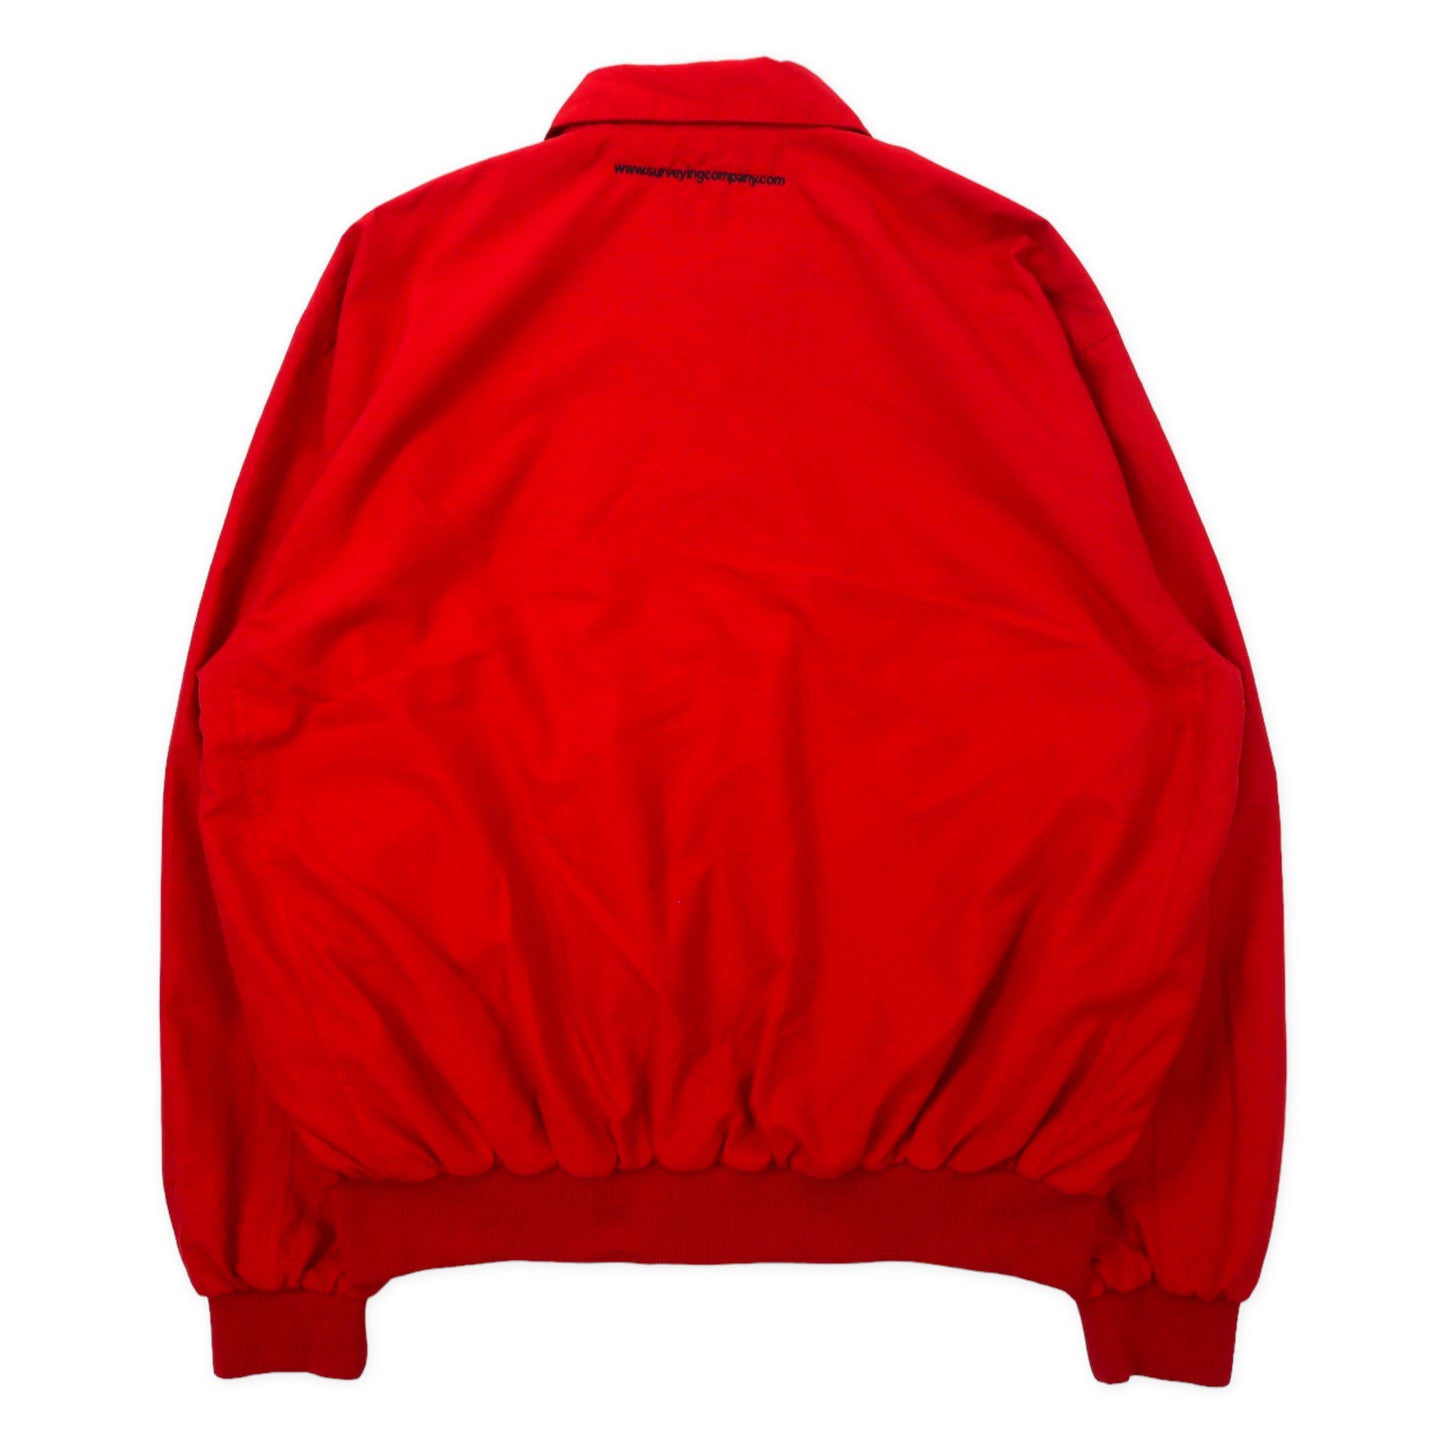 TRI-MOUNTAIN Swing Top Harrington Jacket L Red polyester US ...